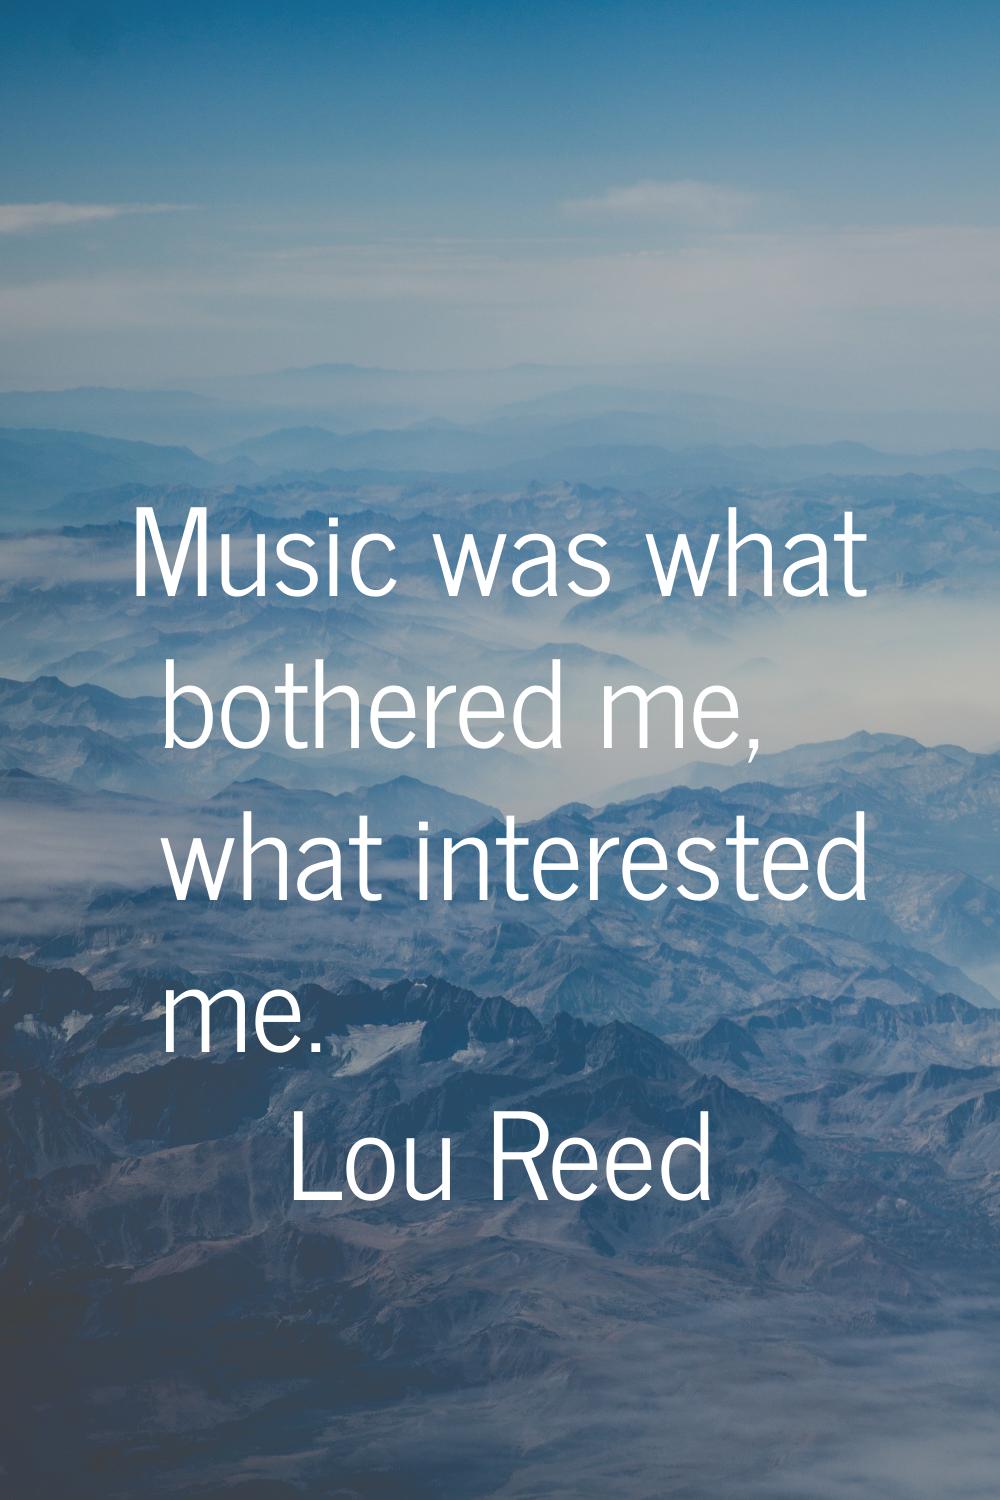 Music was what bothered me, what interested me.